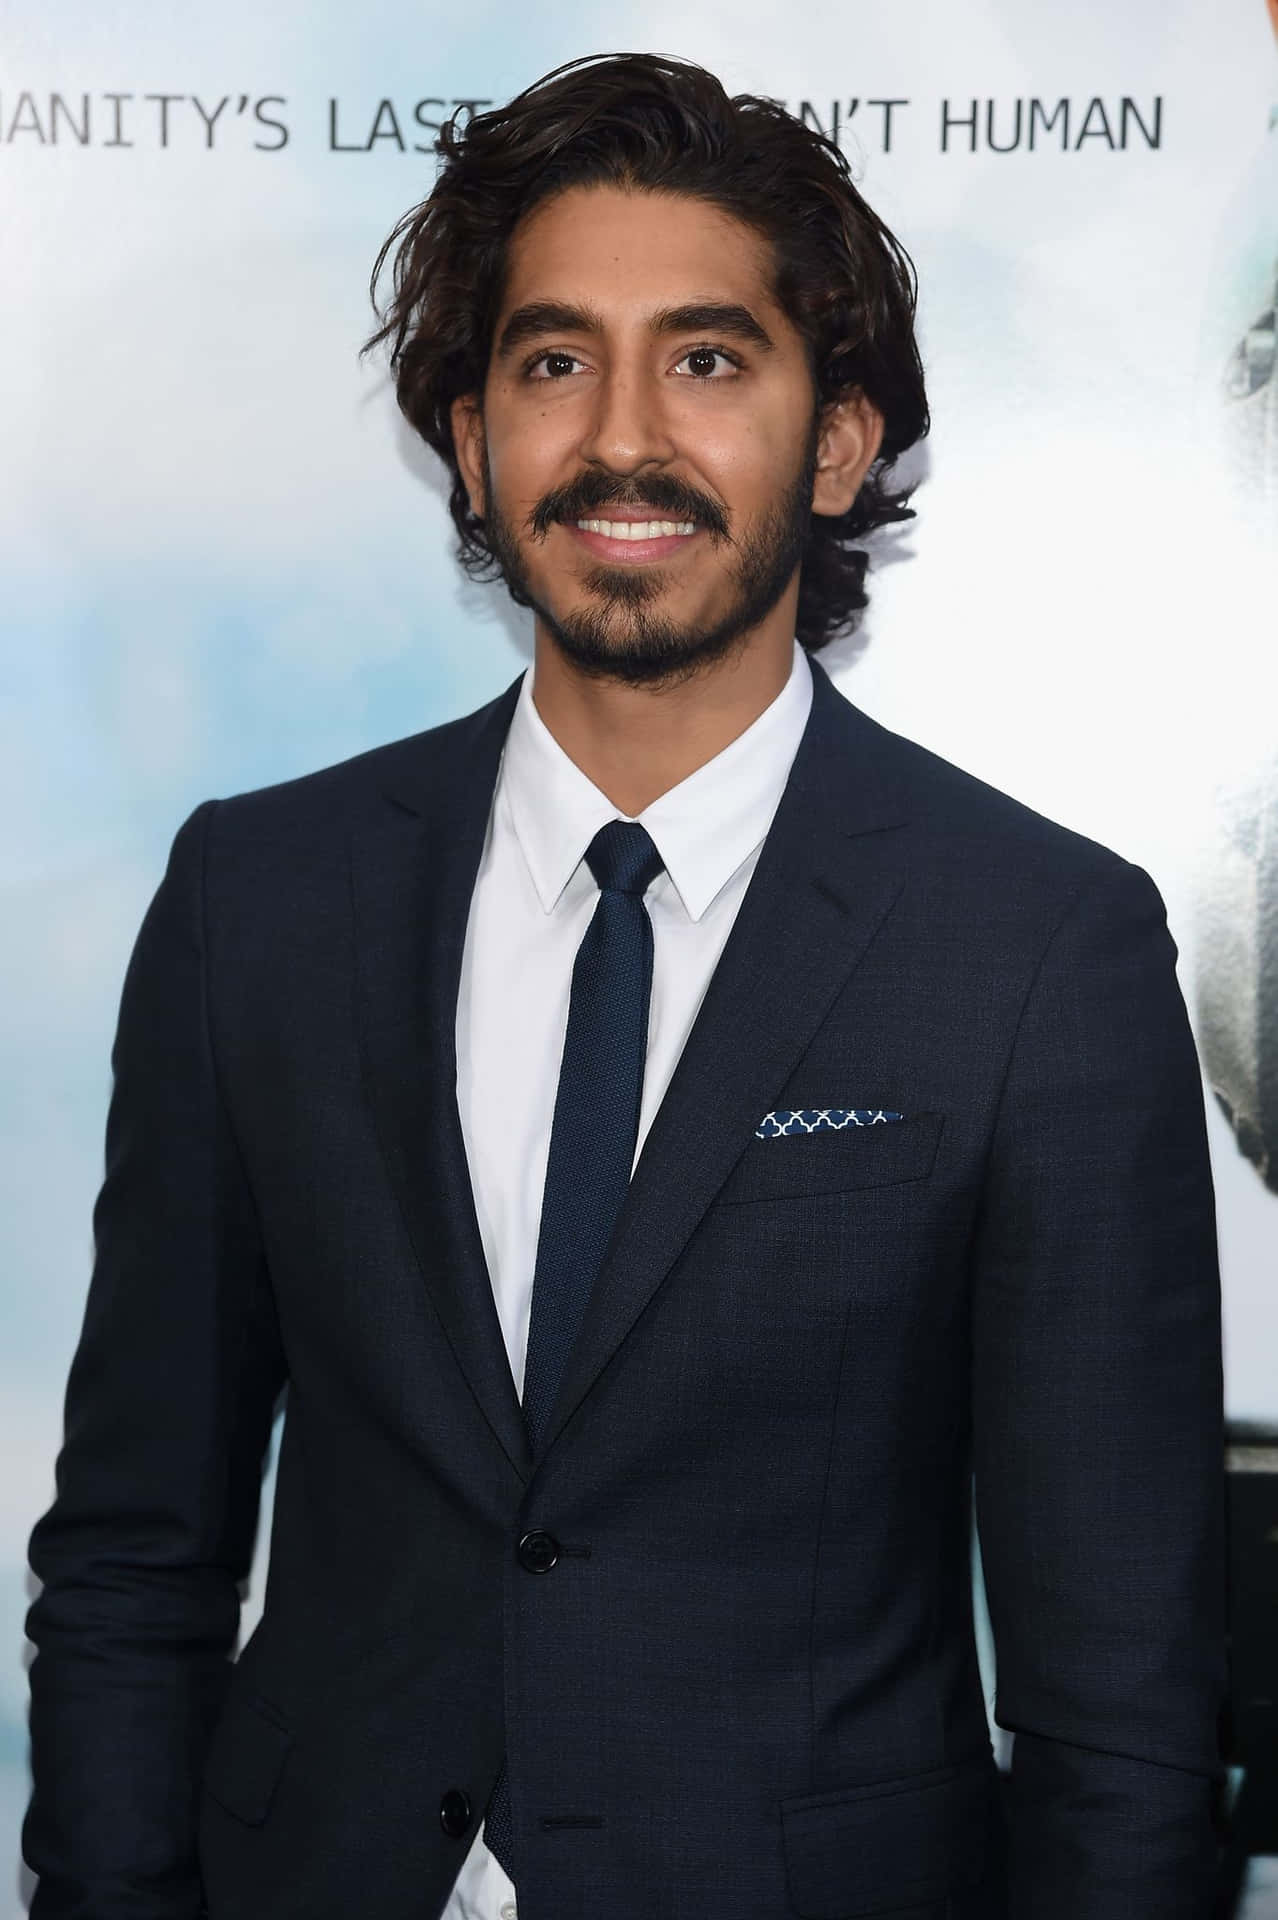 Dev Patel Casual Pose At A Photoshoot Wallpaper